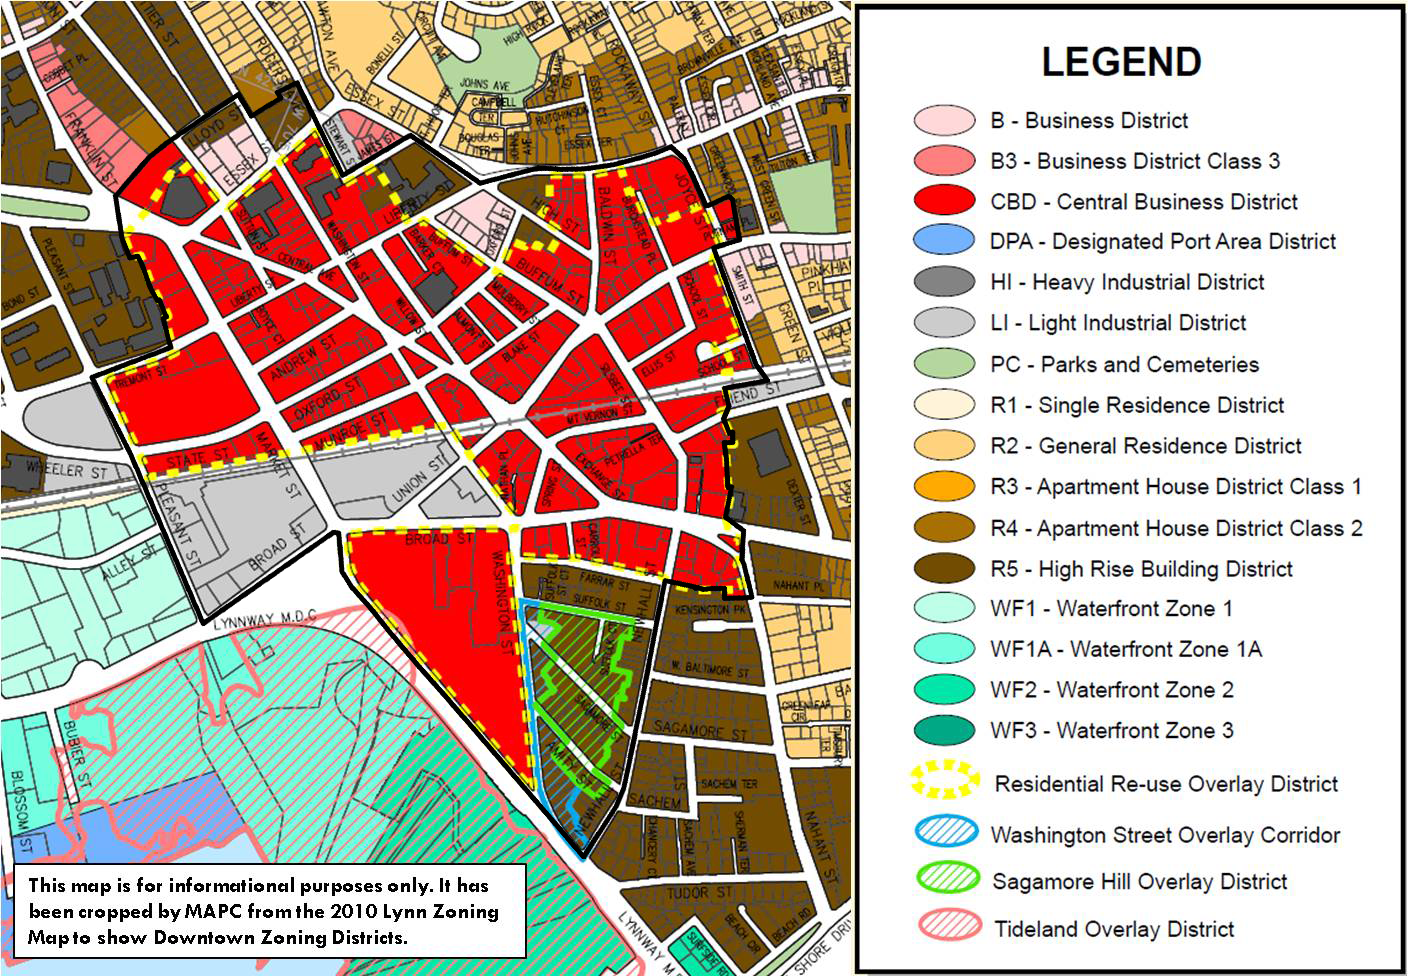 Image of City Zoning Map for Downtown and MAPC study area.